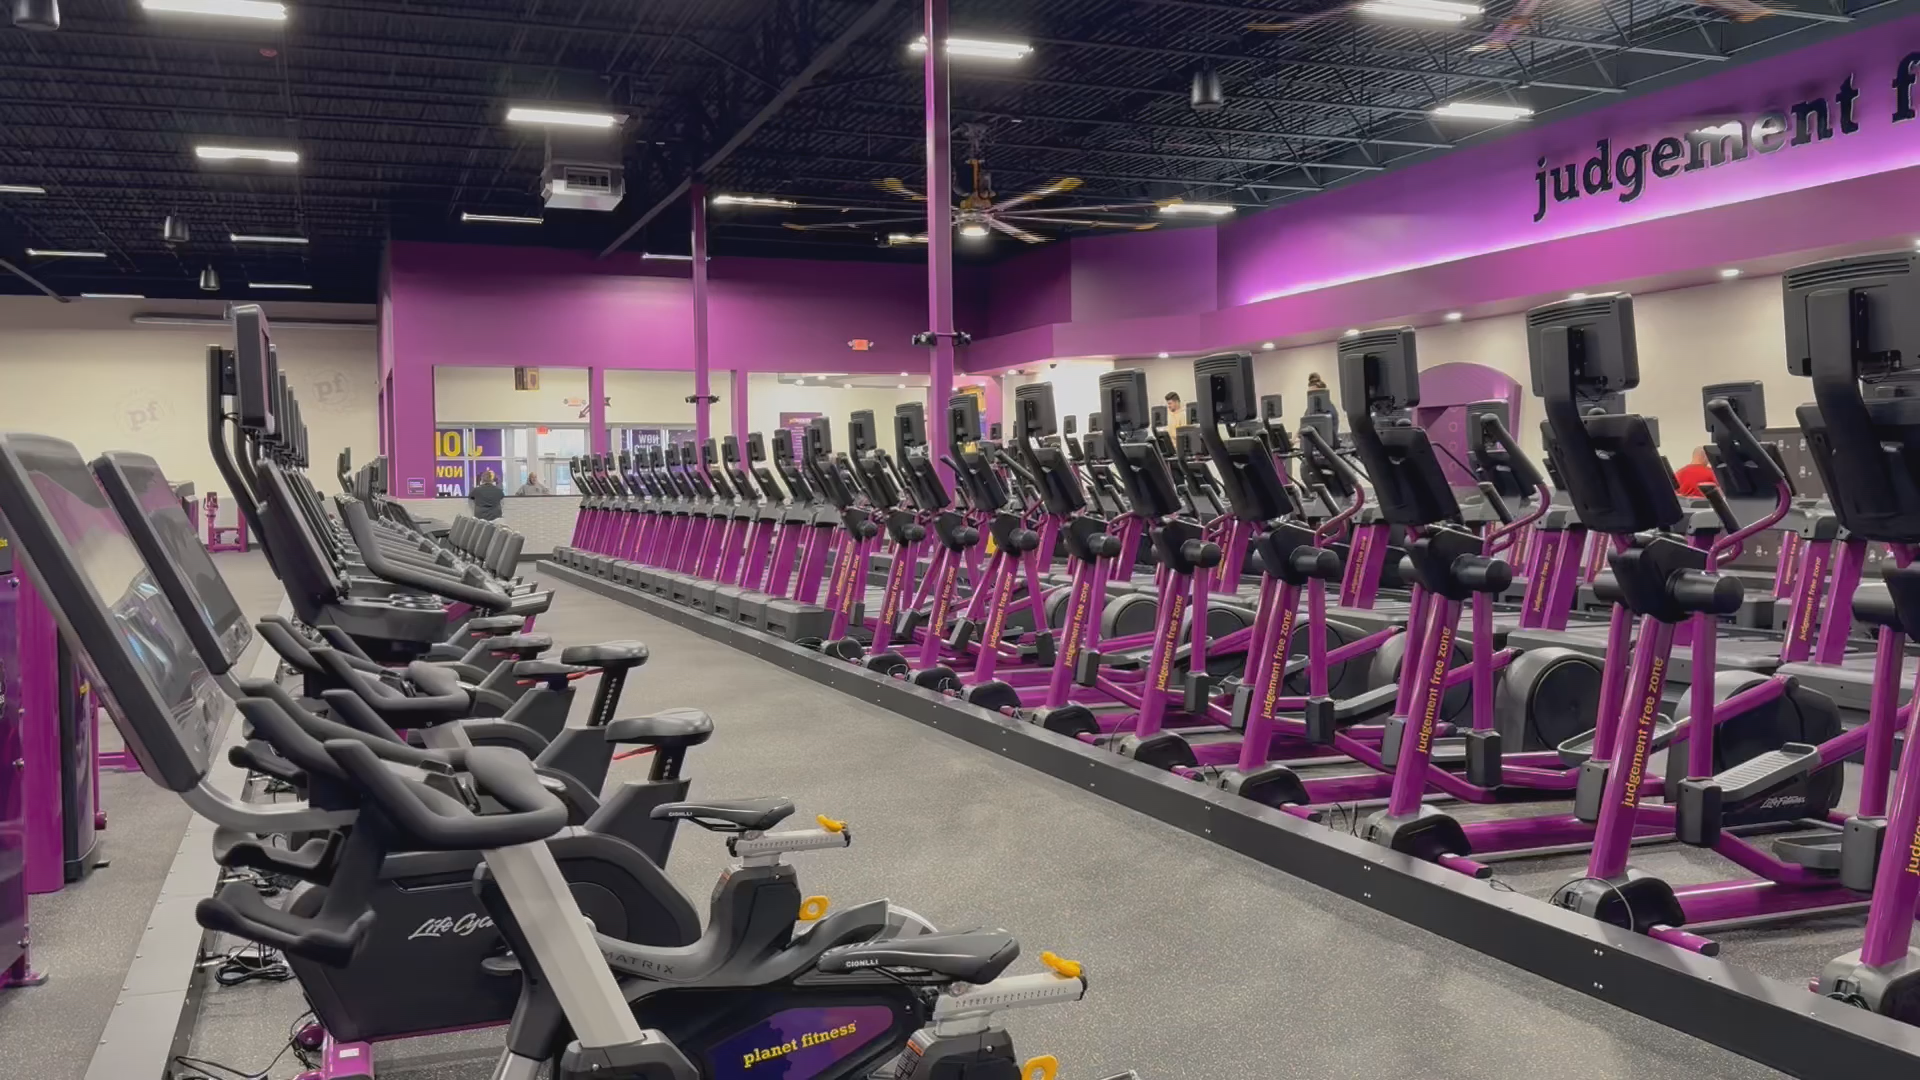 Quincy welcomes Planet Fitness to boost economic activity